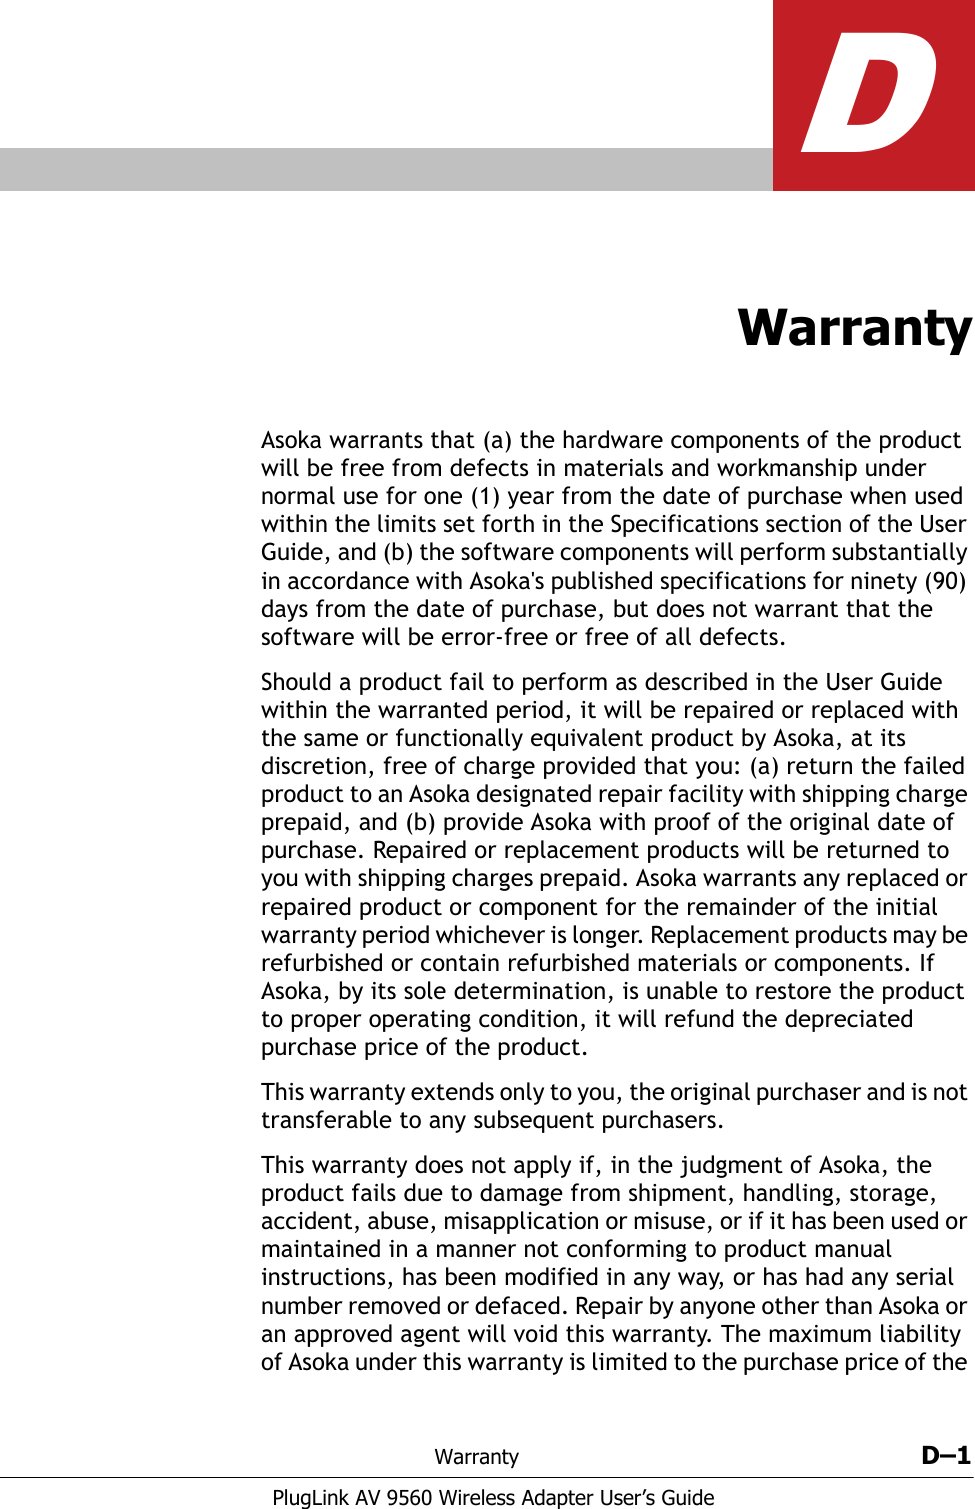 Warranty D–1PlugLink AV 9560 Wireless Adapter User’s GuideDWarrantyAsoka warrants that (a) the hardware components of the product will be free from defects in materials and workmanship under normal use for one (1) year from the date of purchase when used within the limits set forth in the Specifications section of the User Guide, and (b) the software components will perform substantially in accordance with Asoka&apos;s published specifications for ninety (90) days from the date of purchase, but does not warrant that the software will be error-free or free of all defects. Should a product fail to perform as described in the User Guide within the warranted period, it will be repaired or replaced with the same or functionally equivalent product by Asoka, at its discretion, free of charge provided that you: (a) return the failed product to an Asoka designated repair facility with shipping charge prepaid, and (b) provide Asoka with proof of the original date of purchase. Repaired or replacement products will be returned to you with shipping charges prepaid. Asoka warrants any replaced or repaired product or component for the remainder of the initial warranty period whichever is longer. Replacement products may be refurbished or contain refurbished materials or components. If Asoka, by its sole determination, is unable to restore the product to proper operating condition, it will refund the depreciated purchase price of the product.This warranty extends only to you, the original purchaser and is not transferable to any subsequent purchasers. This warranty does not apply if, in the judgment of Asoka, the product fails due to damage from shipment, handling, storage, accident, abuse, misapplication or misuse, or if it has been used or maintained in a manner not conforming to product manual instructions, has been modified in any way, or has had any serial number removed or defaced. Repair by anyone other than Asoka or an approved agent will void this warranty. The maximum liability of Asoka under this warranty is limited to the purchase price of the 